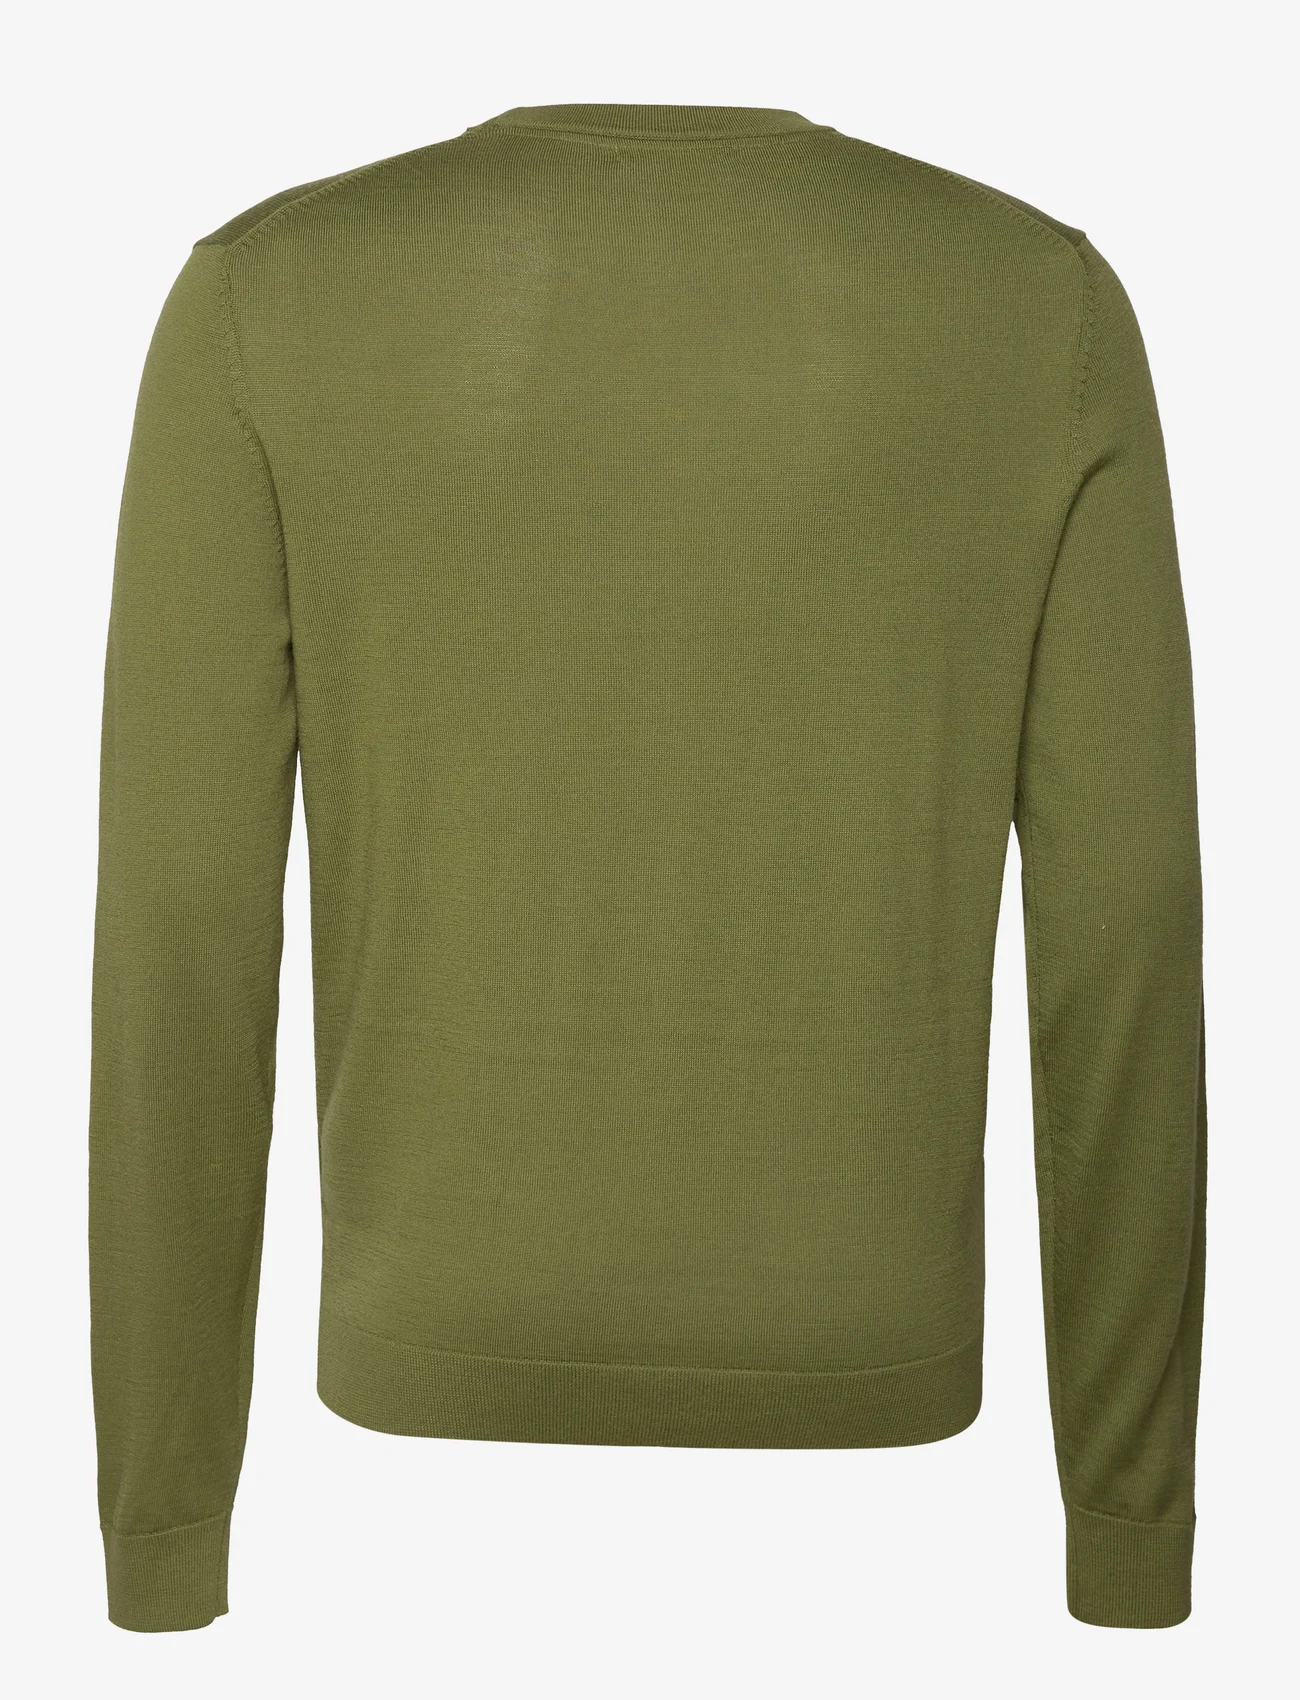 Selected Homme - SLHTOWN MERINO COOLMAX KNIT CREW NOOS - basic knitwear - olive branch - 1